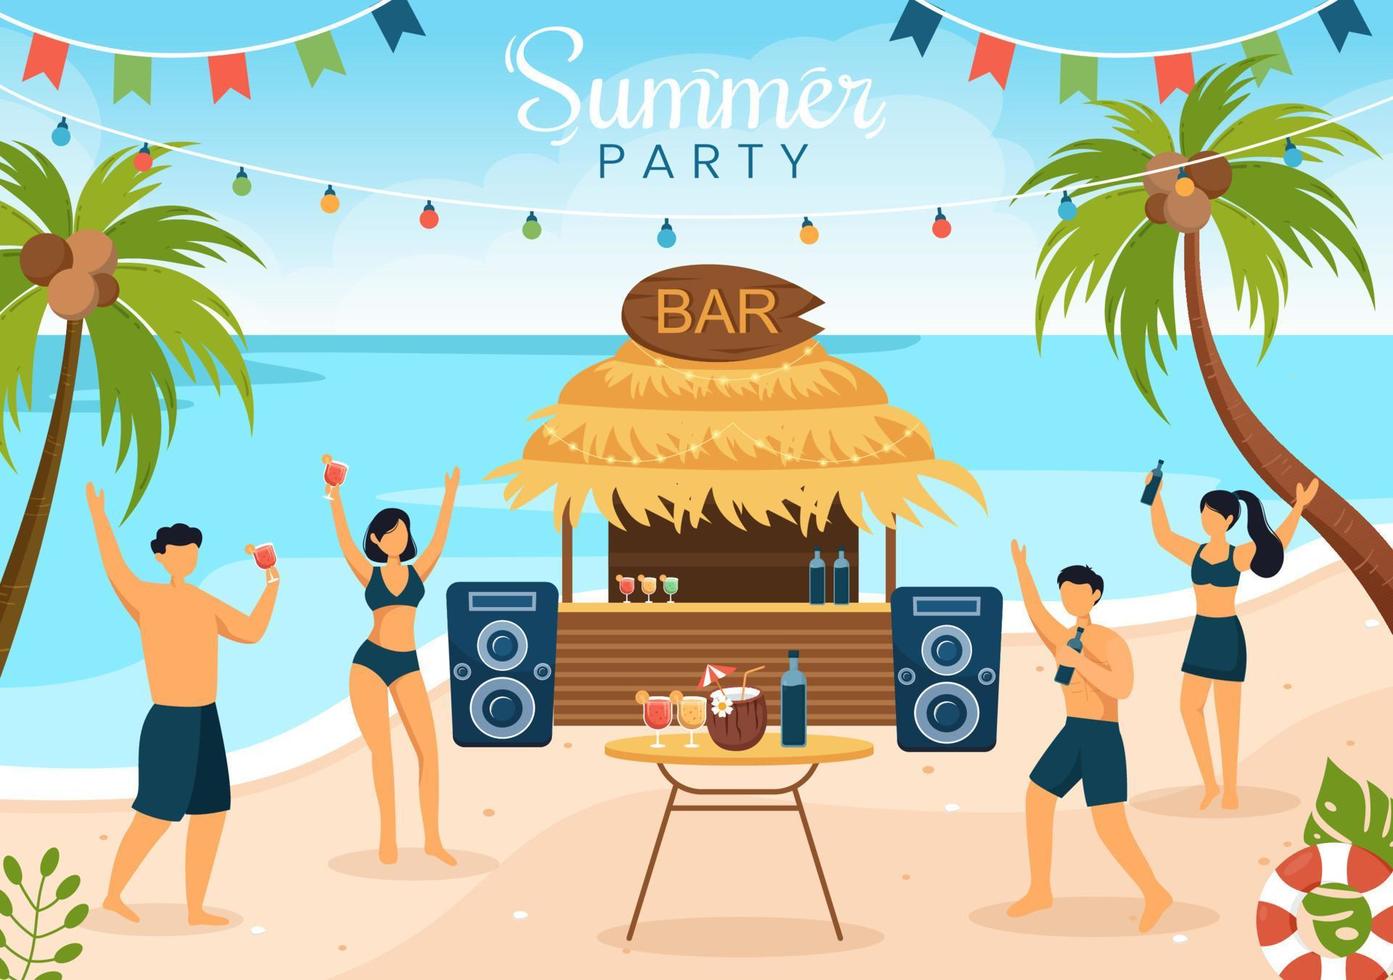 Summer Party Cartoon Background Illustration with Tropical Plants, Equipment on the Beach for Poster or Greeting Card Design vector